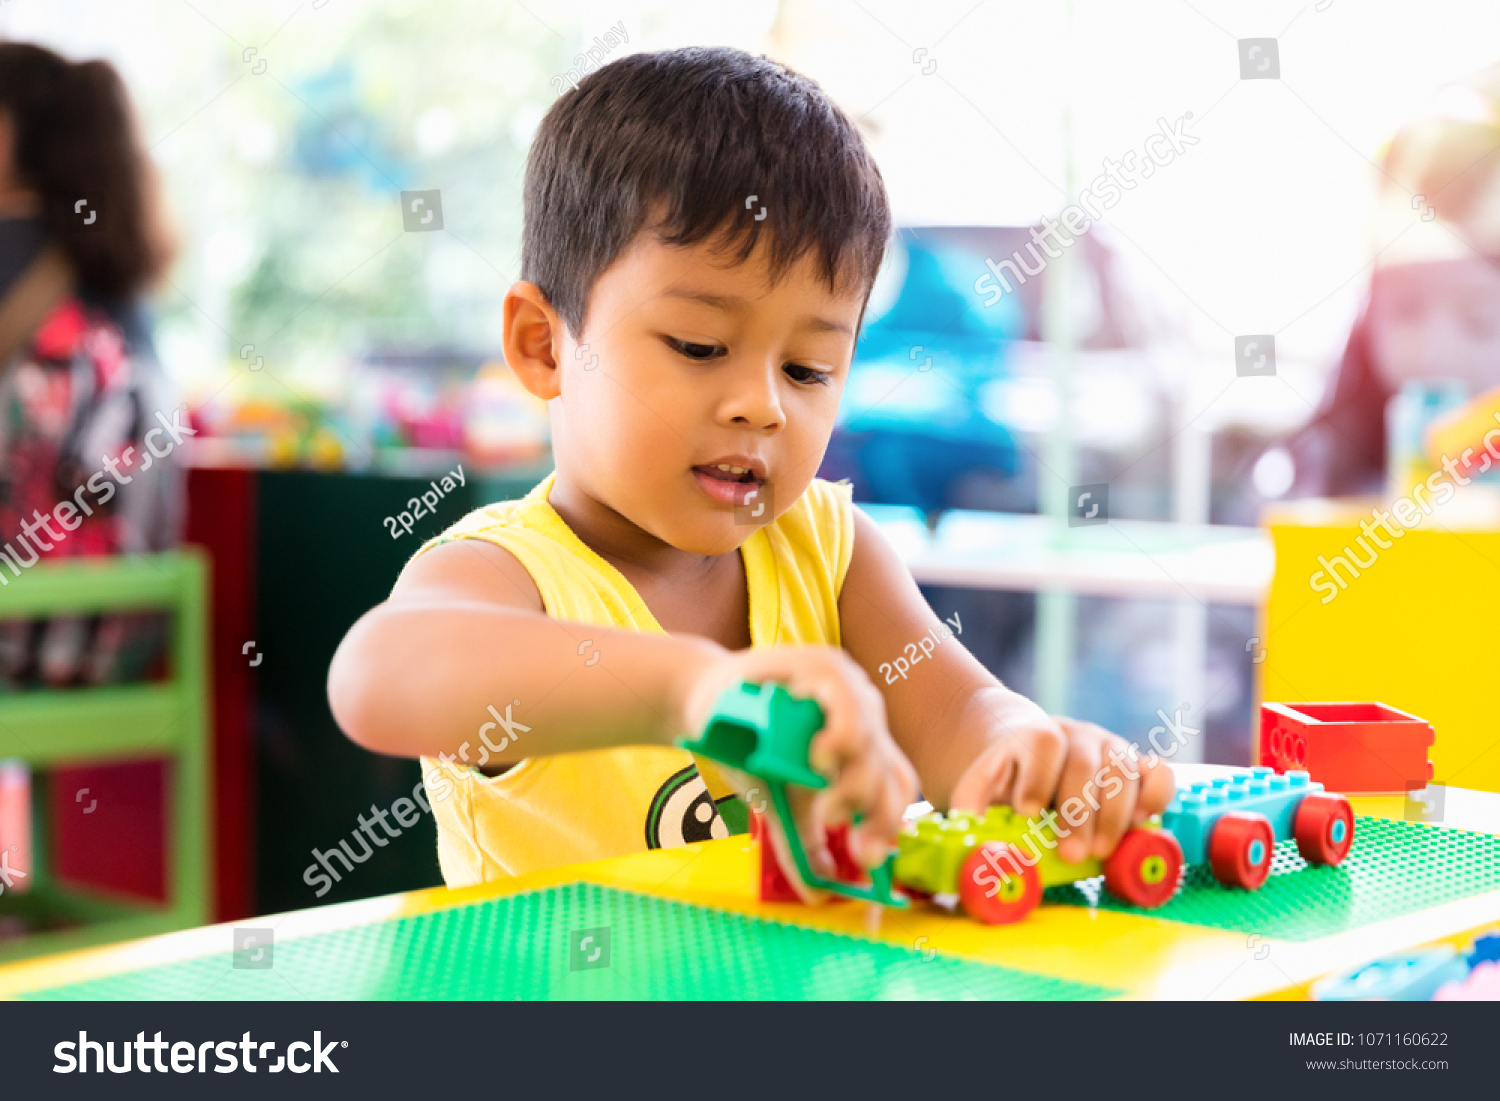 A cute child playing with color toy indoor #1071160622